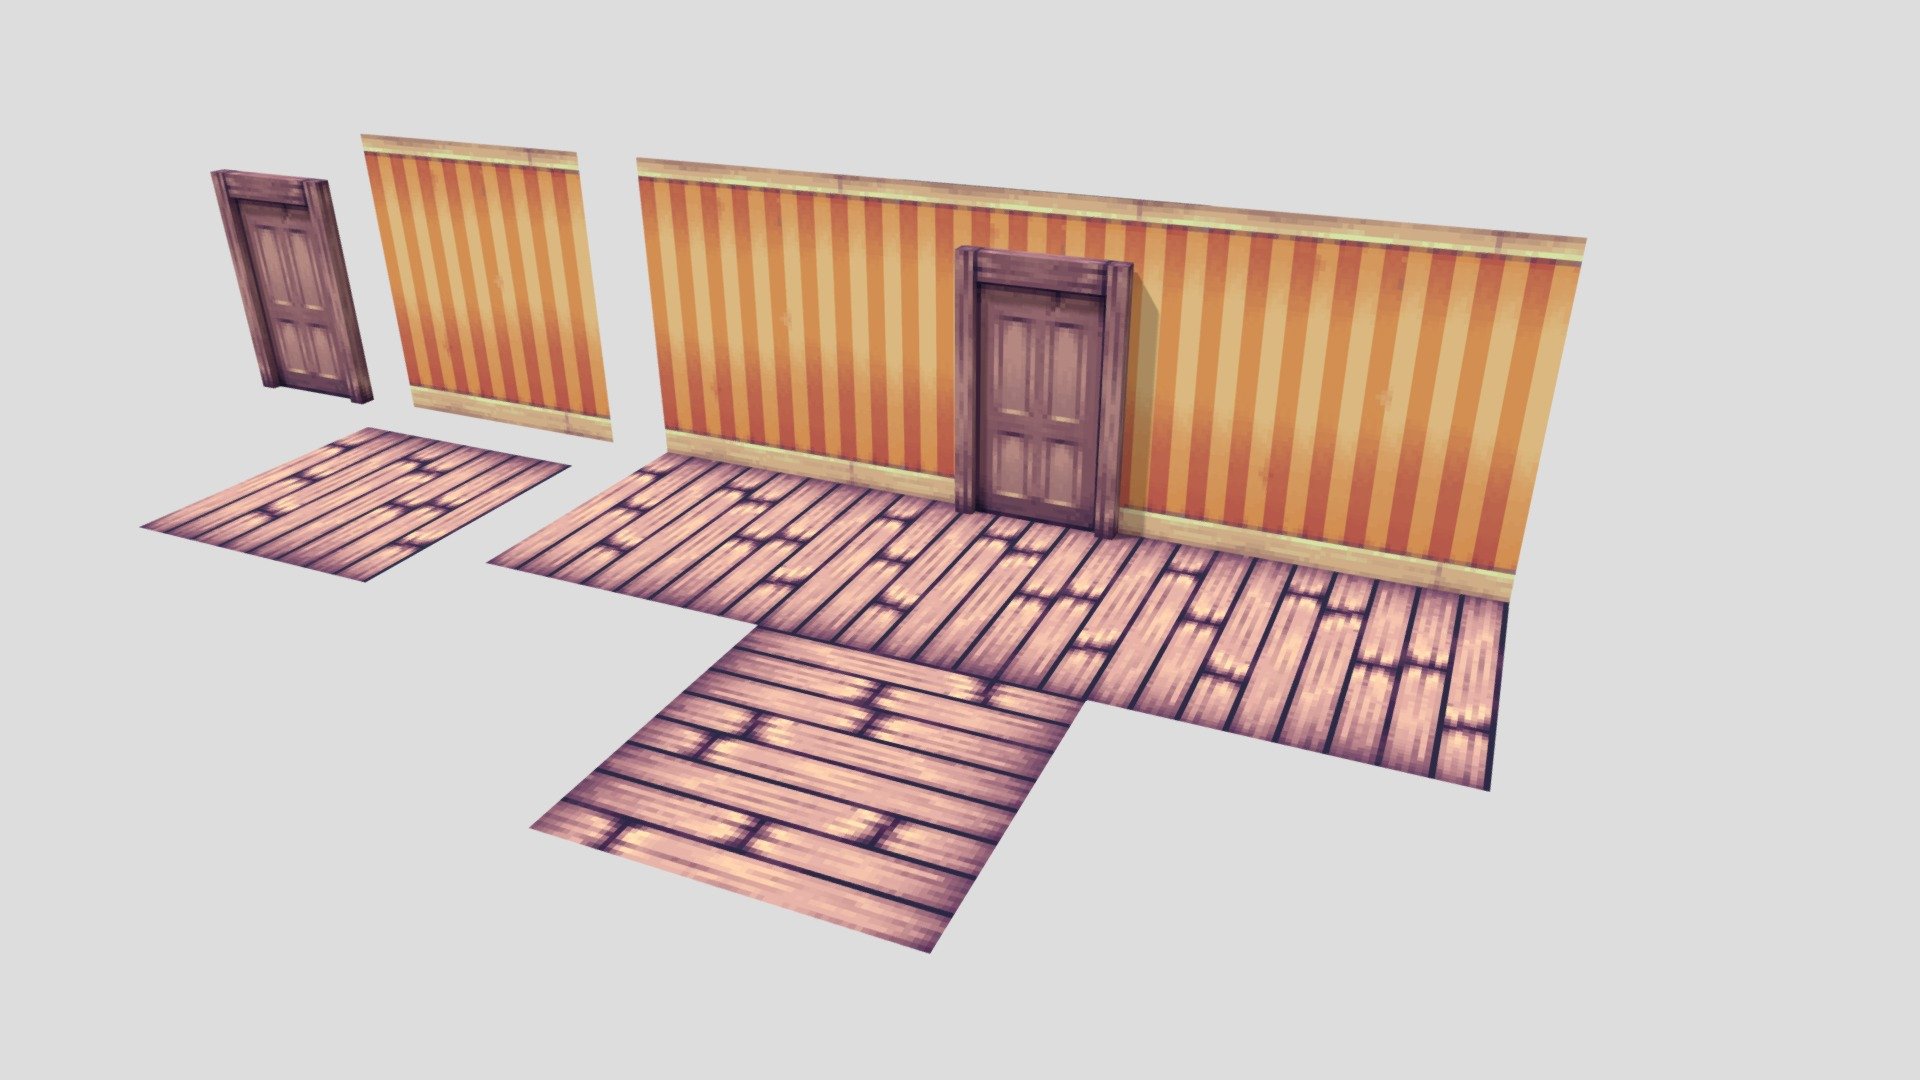 Low-poly, pixel art modular horror house assets modelled and textured in Blockbench 3d model